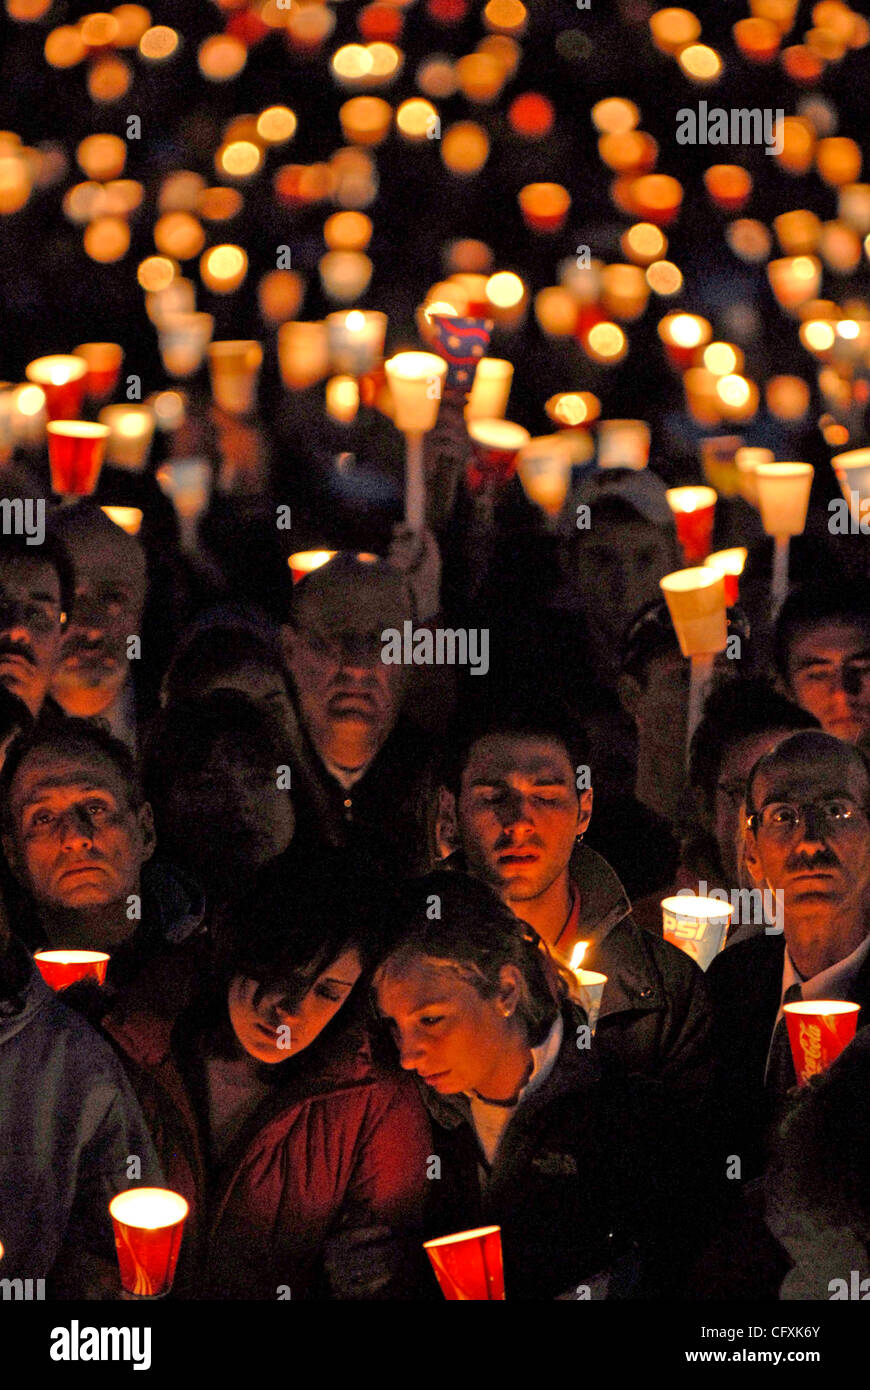 Apr 17, 2007 - Blacksburg, VA, USA - 24 hours after South Korean Cho Seung-Hui, a 23-year-old Virginia Tech Senior, English major gunned down 32 and then took his own life in the Virginia Tech massacre. The deadliest mass shooting in U.S. history and one of the worst ever. Cho in the USA since 1992, Stock Photo